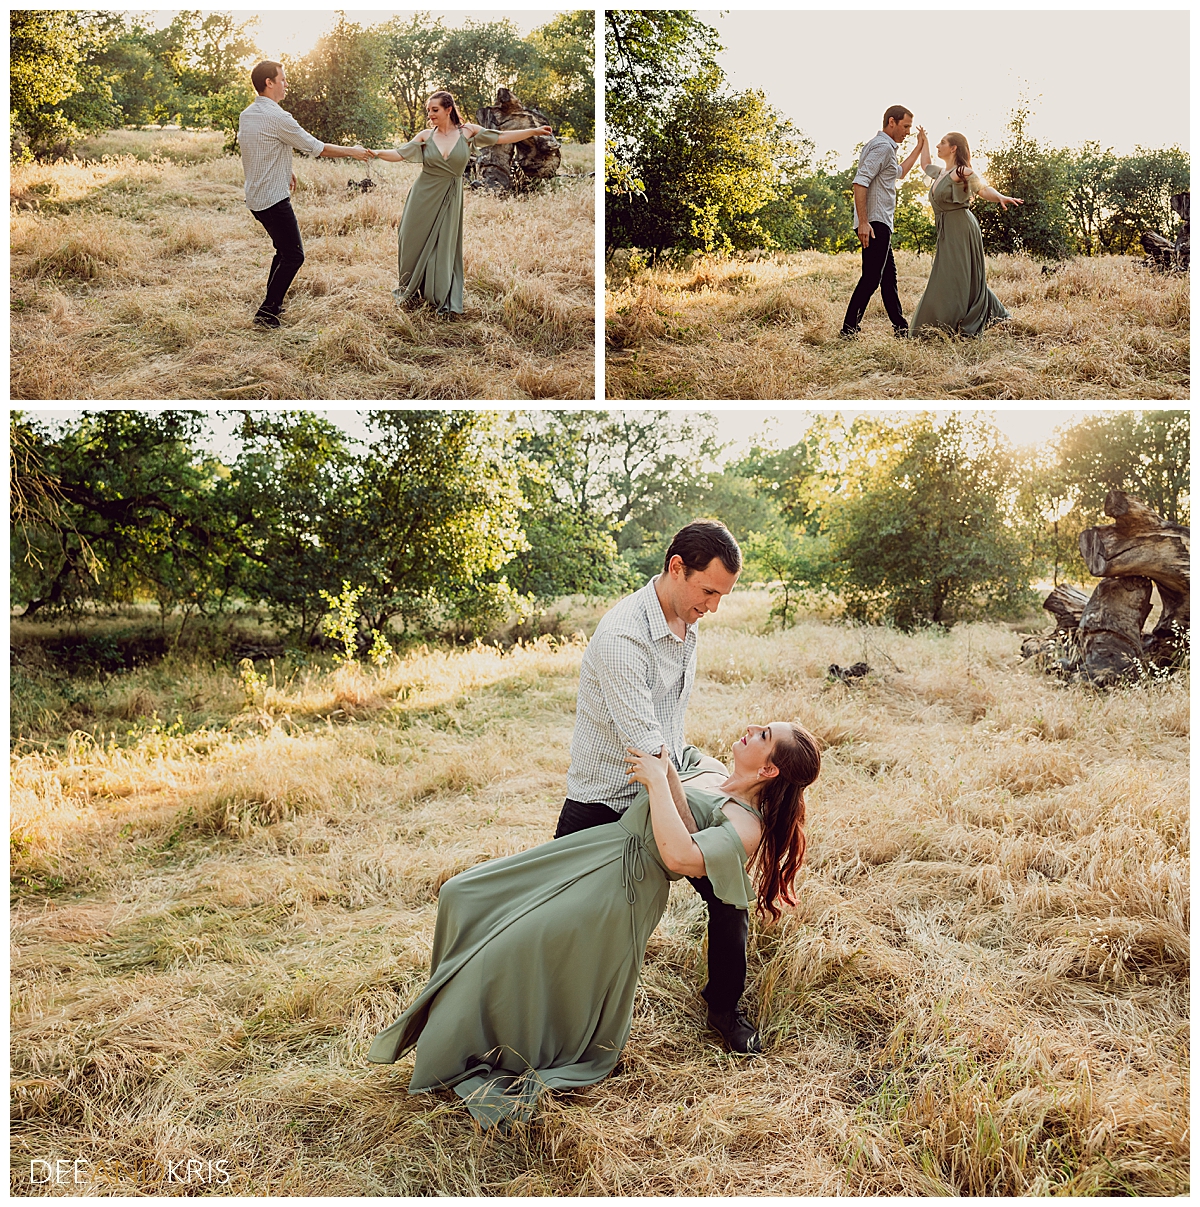 Three images of couple dancing in various poses in field of tall dried grass.